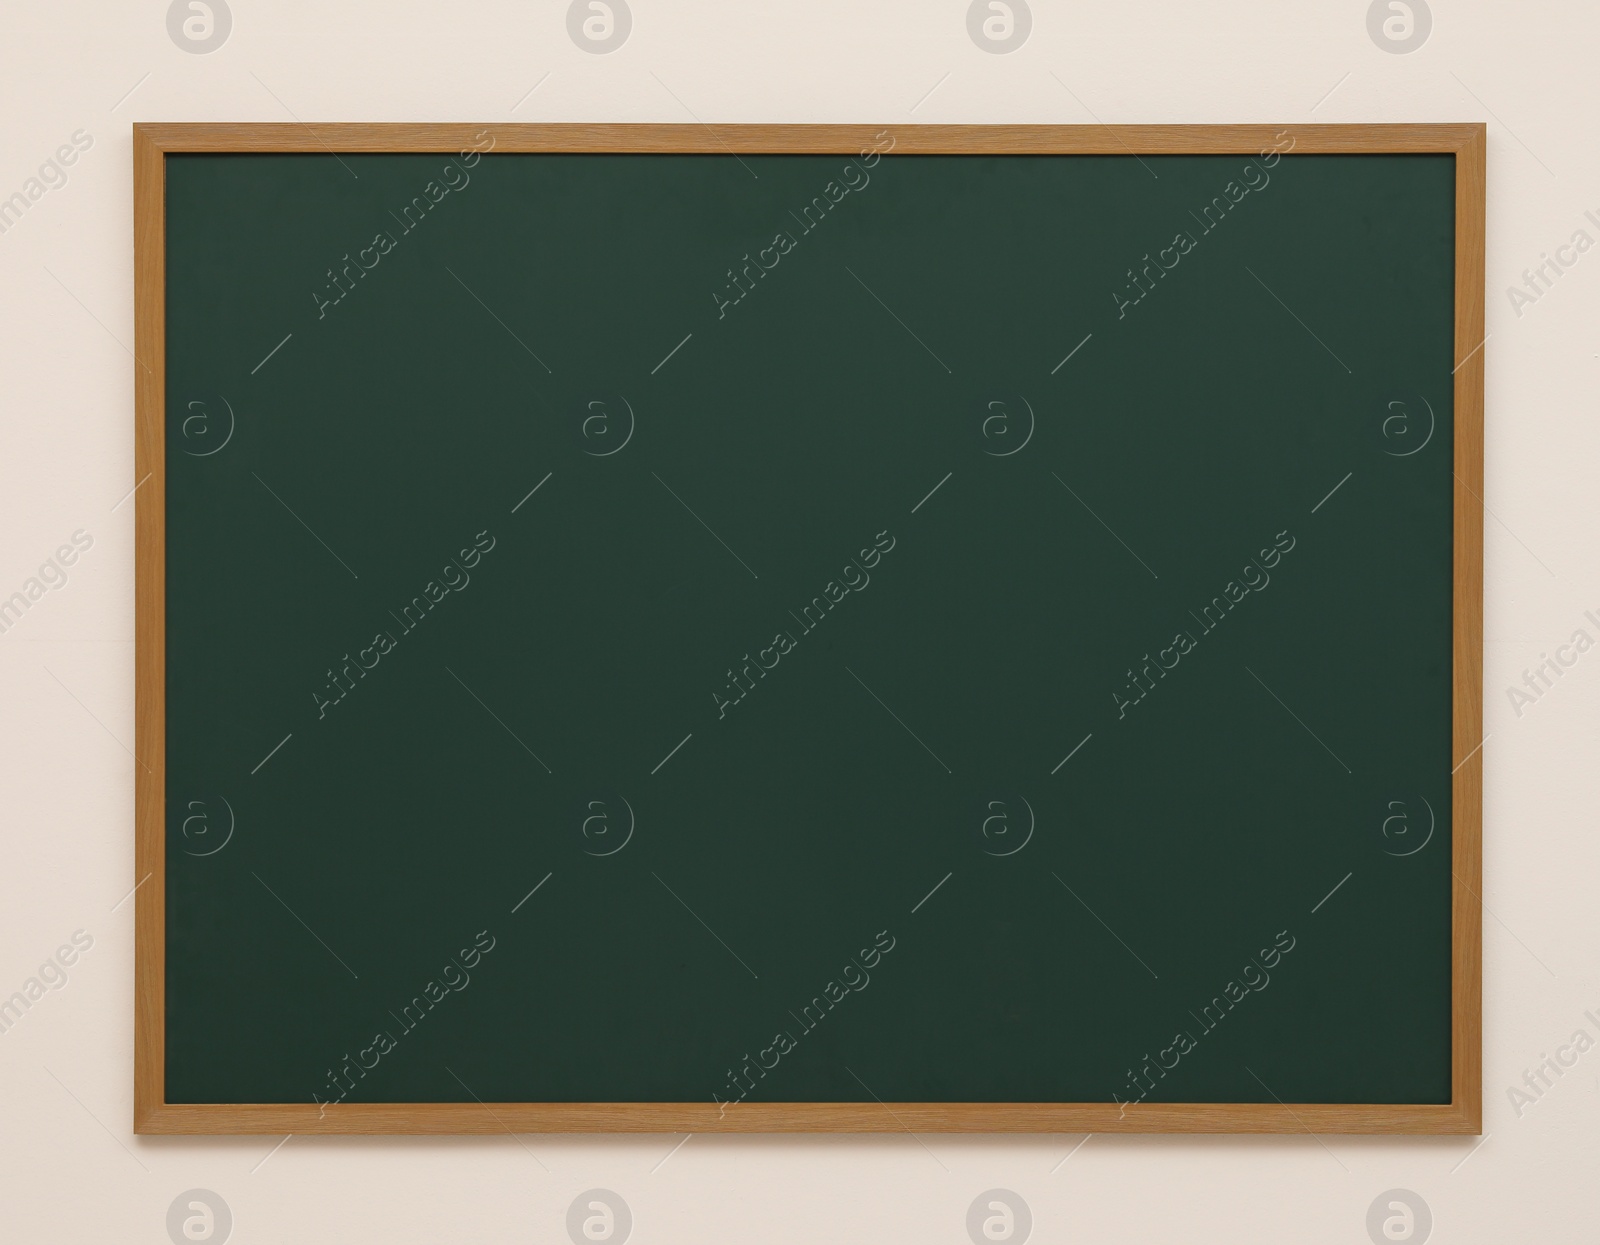 Photo of Clean green chalkboard hanging on white wall